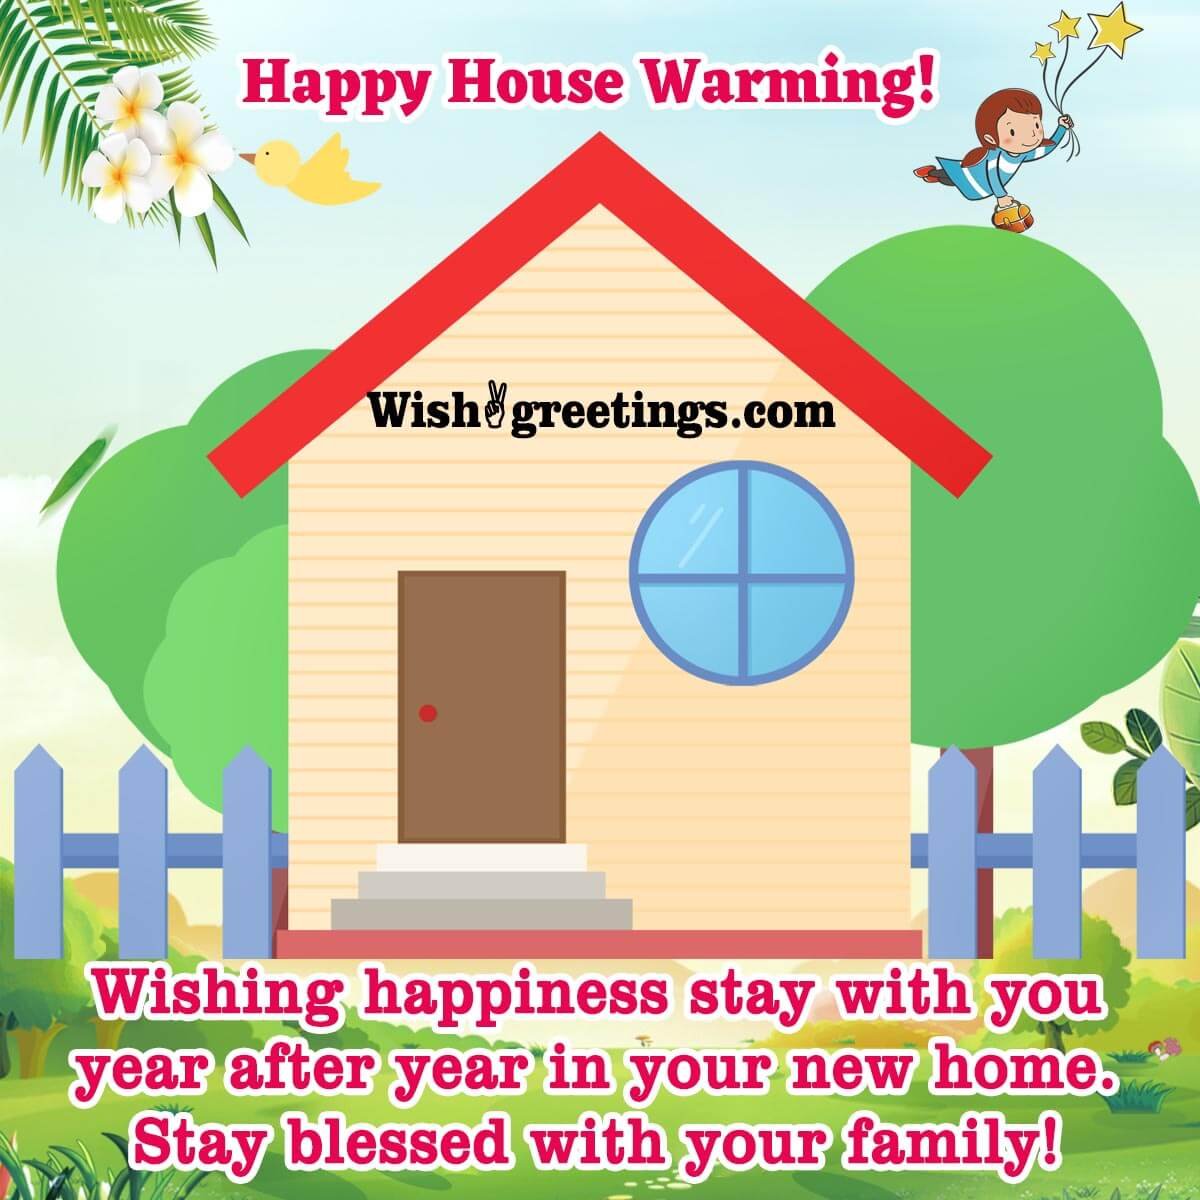 Happy House Warming Blessings